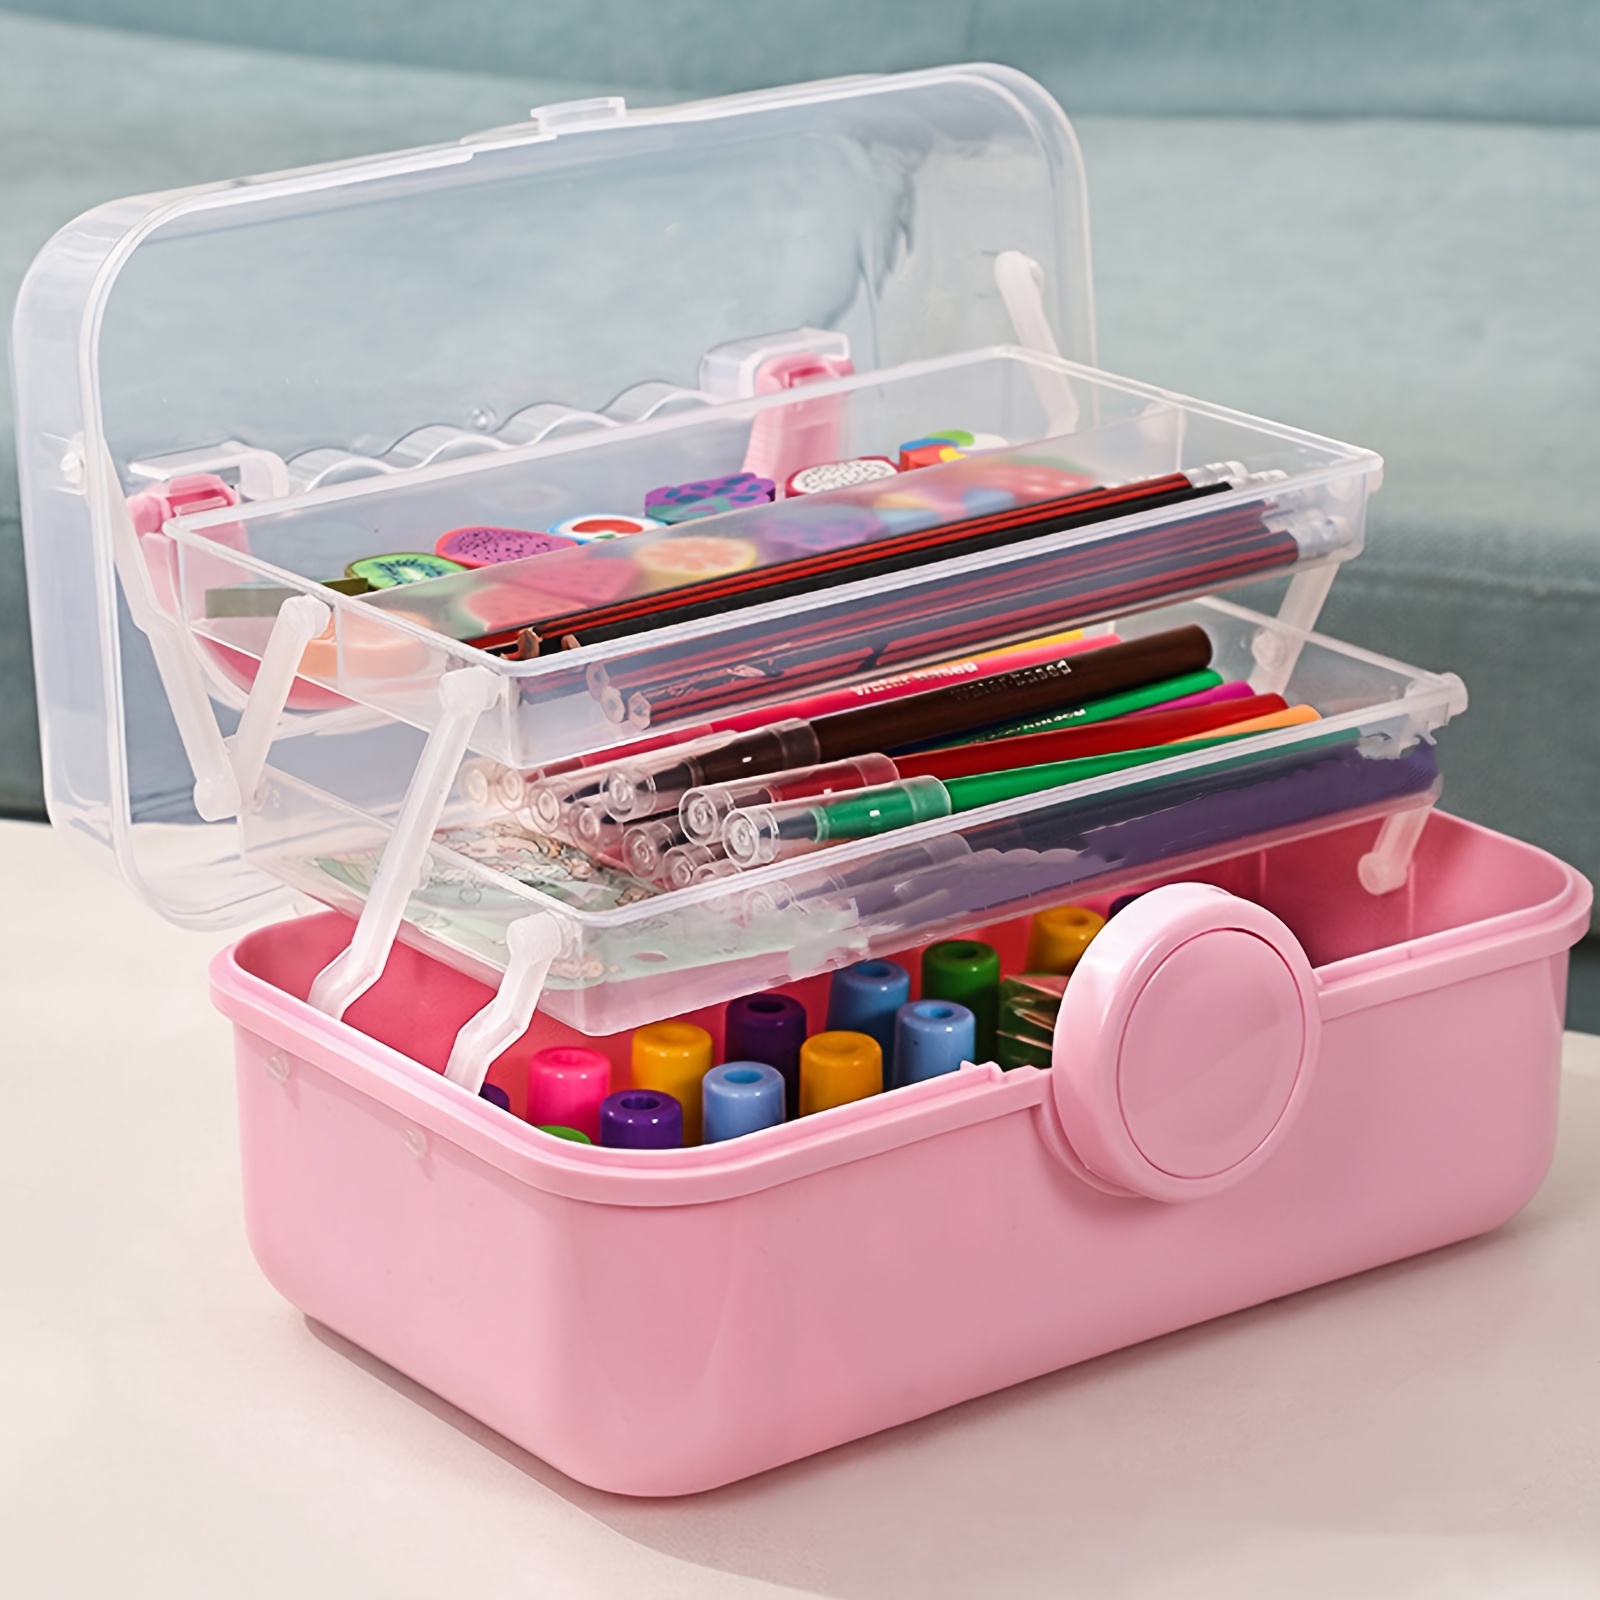 Clear Craft and Sewing Supplies Bin with Detachable Tray and Top Lid Flap, Arts & Crafts Container Organizer Box